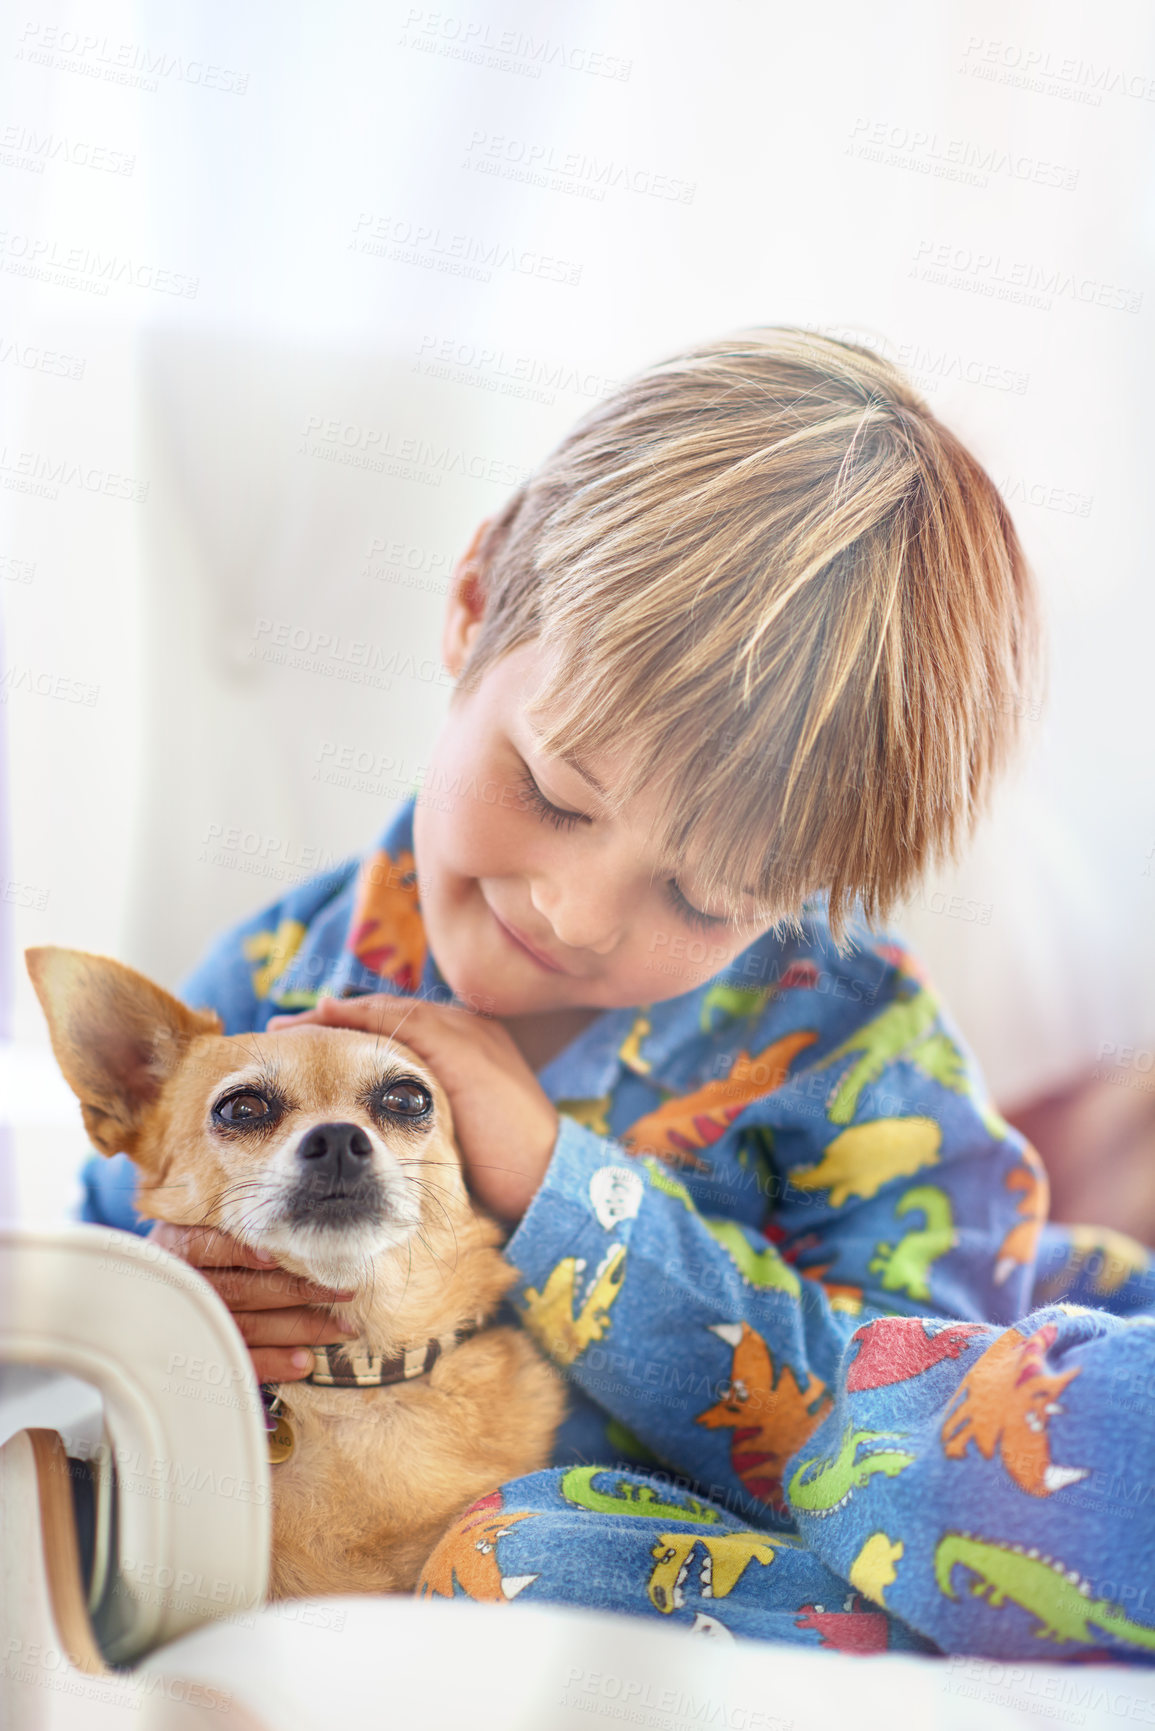 Buy stock photo Home, sofa and kid with dog as pet in living room for fun, play and bonding with child development. Connection, animal and puppy in couch at lounge for care with support, love and childhood memories.